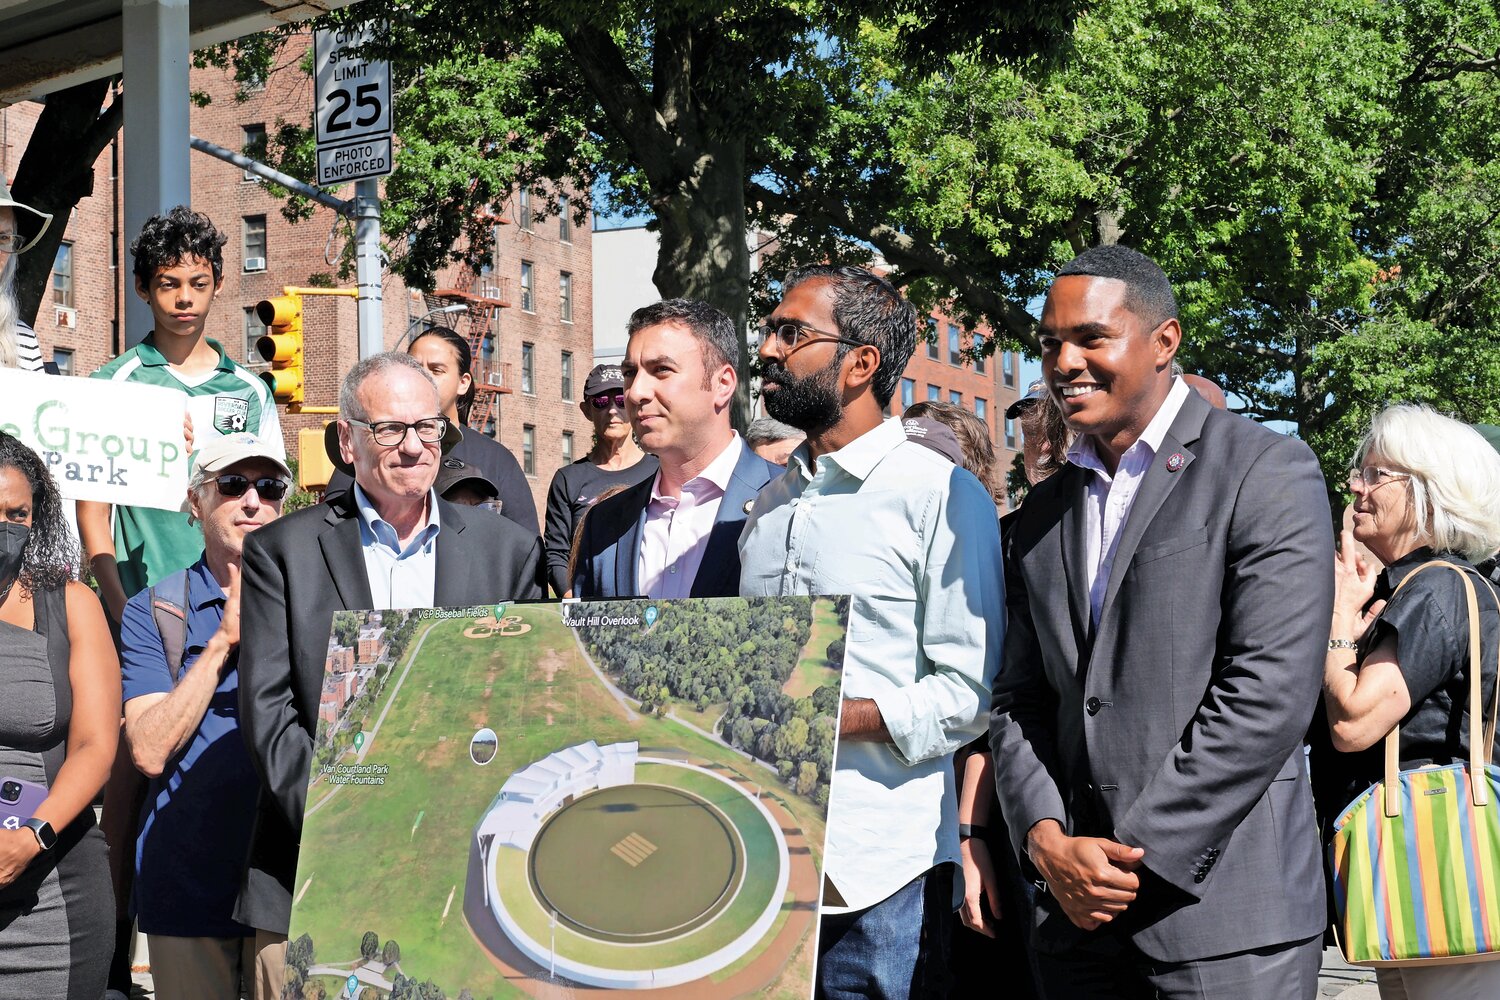 U.S. Rep. Ritchie Torres, Councilman Eric Dinowitz and Assemblyman Jeffrey Dinowitz met at the Van Cortlandt Park parade grounds on Sept. 1 to protest the plan to build a temporary cricket stadium there. Then on Sept. 22, they celebrated that the 34,000-seat cricket stadium would not be erected at the park. By their side were some of the most vocal people in opposition to the Adams Administration proposal, such as the Van Cortlandt Park Alliance, Bronx Council for Environmental Quality and the Riverdale Nature Preservancy.